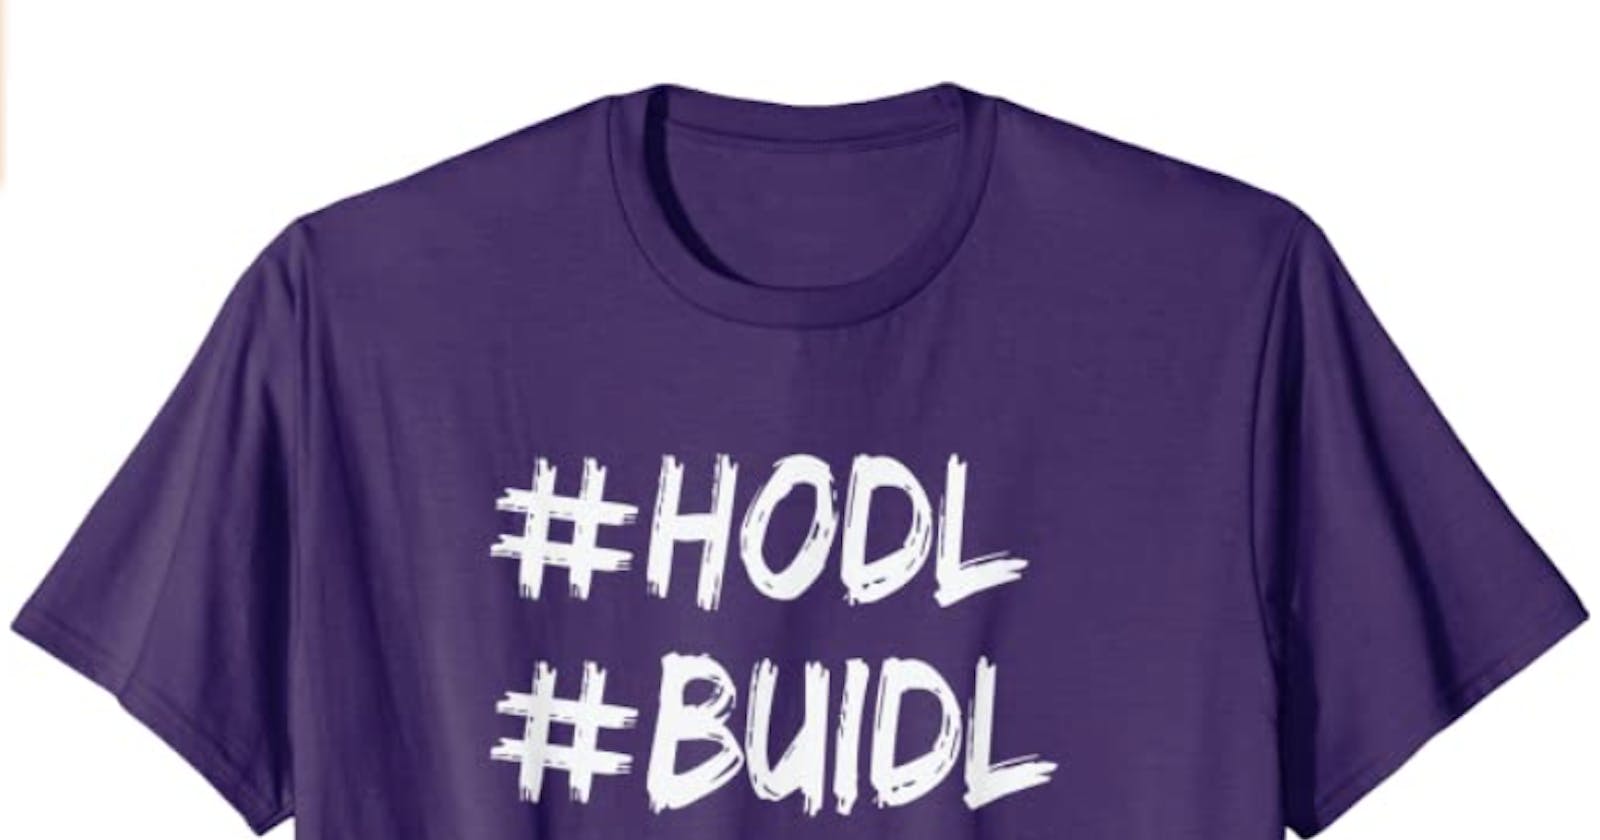 BUIDL and HODL